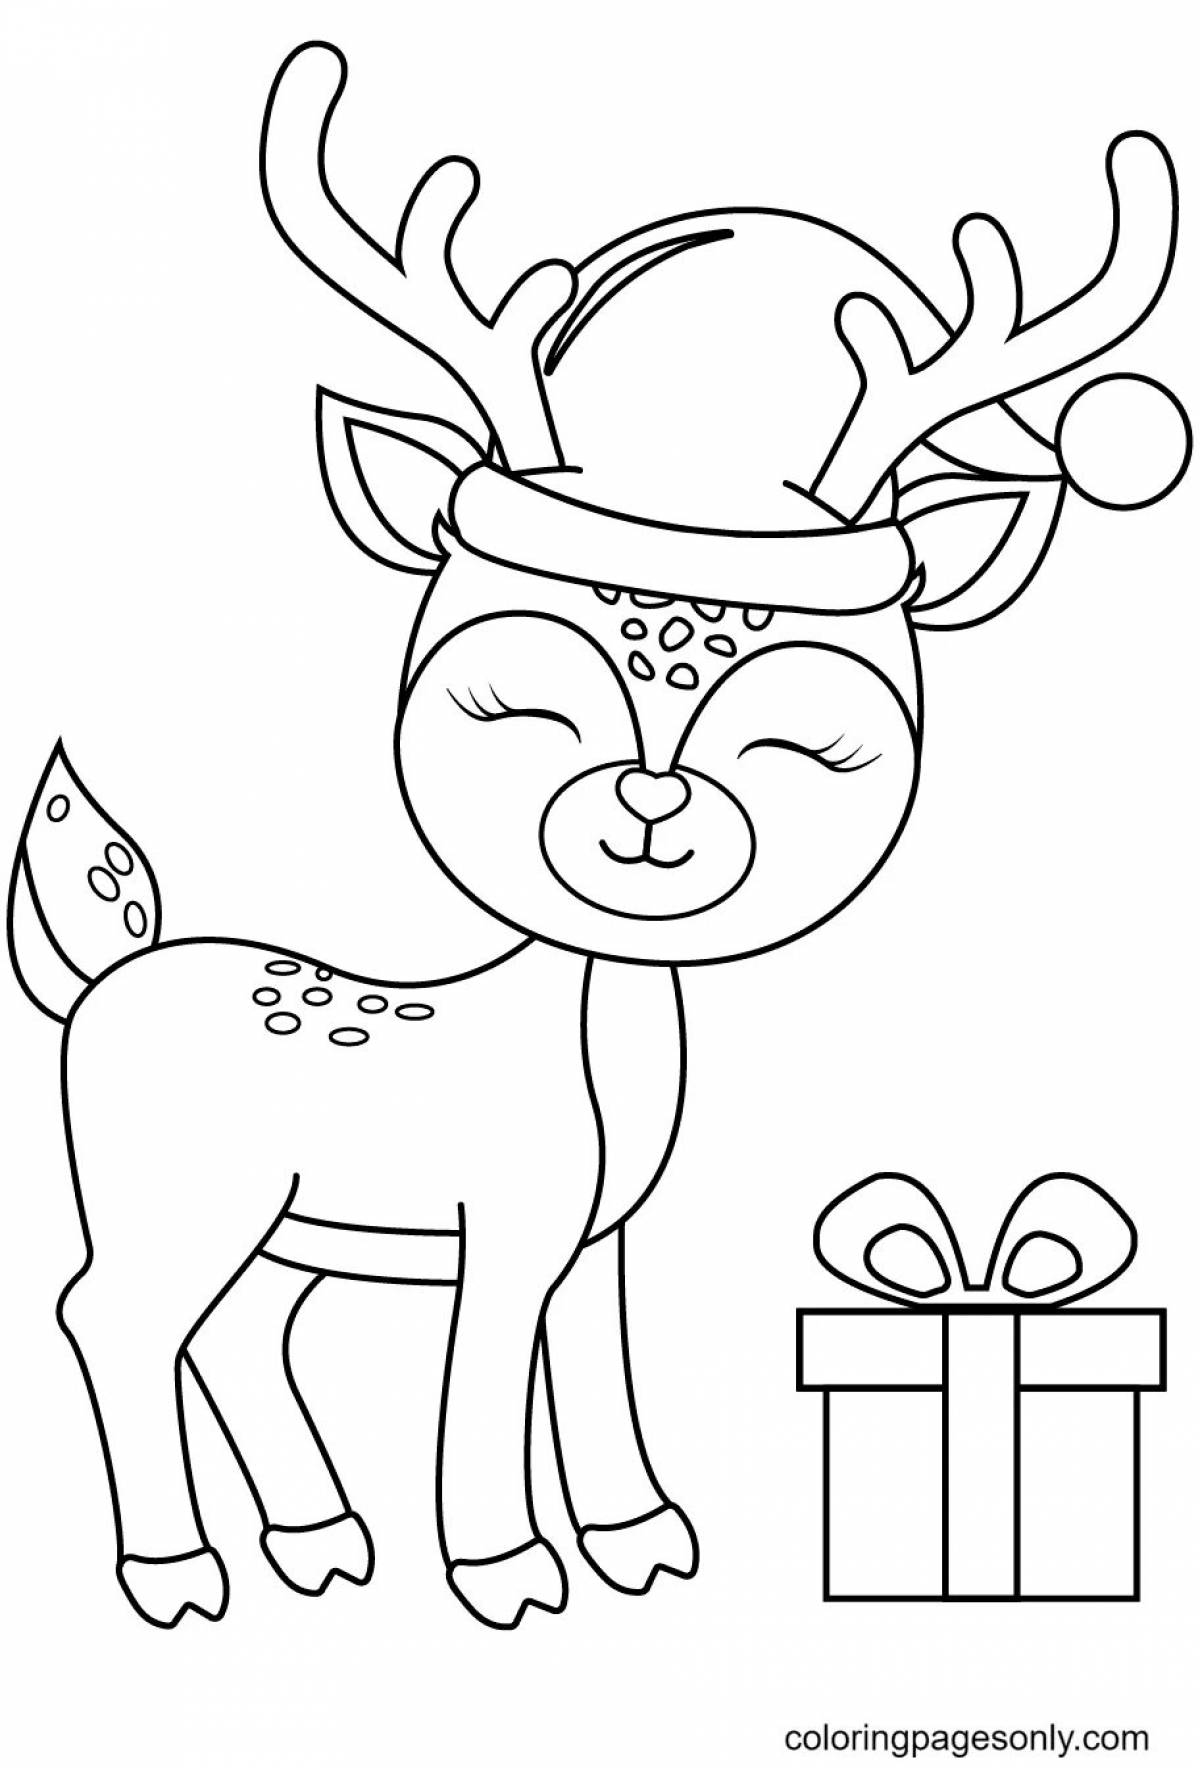 Glitter Christmas reindeer coloring book for kids